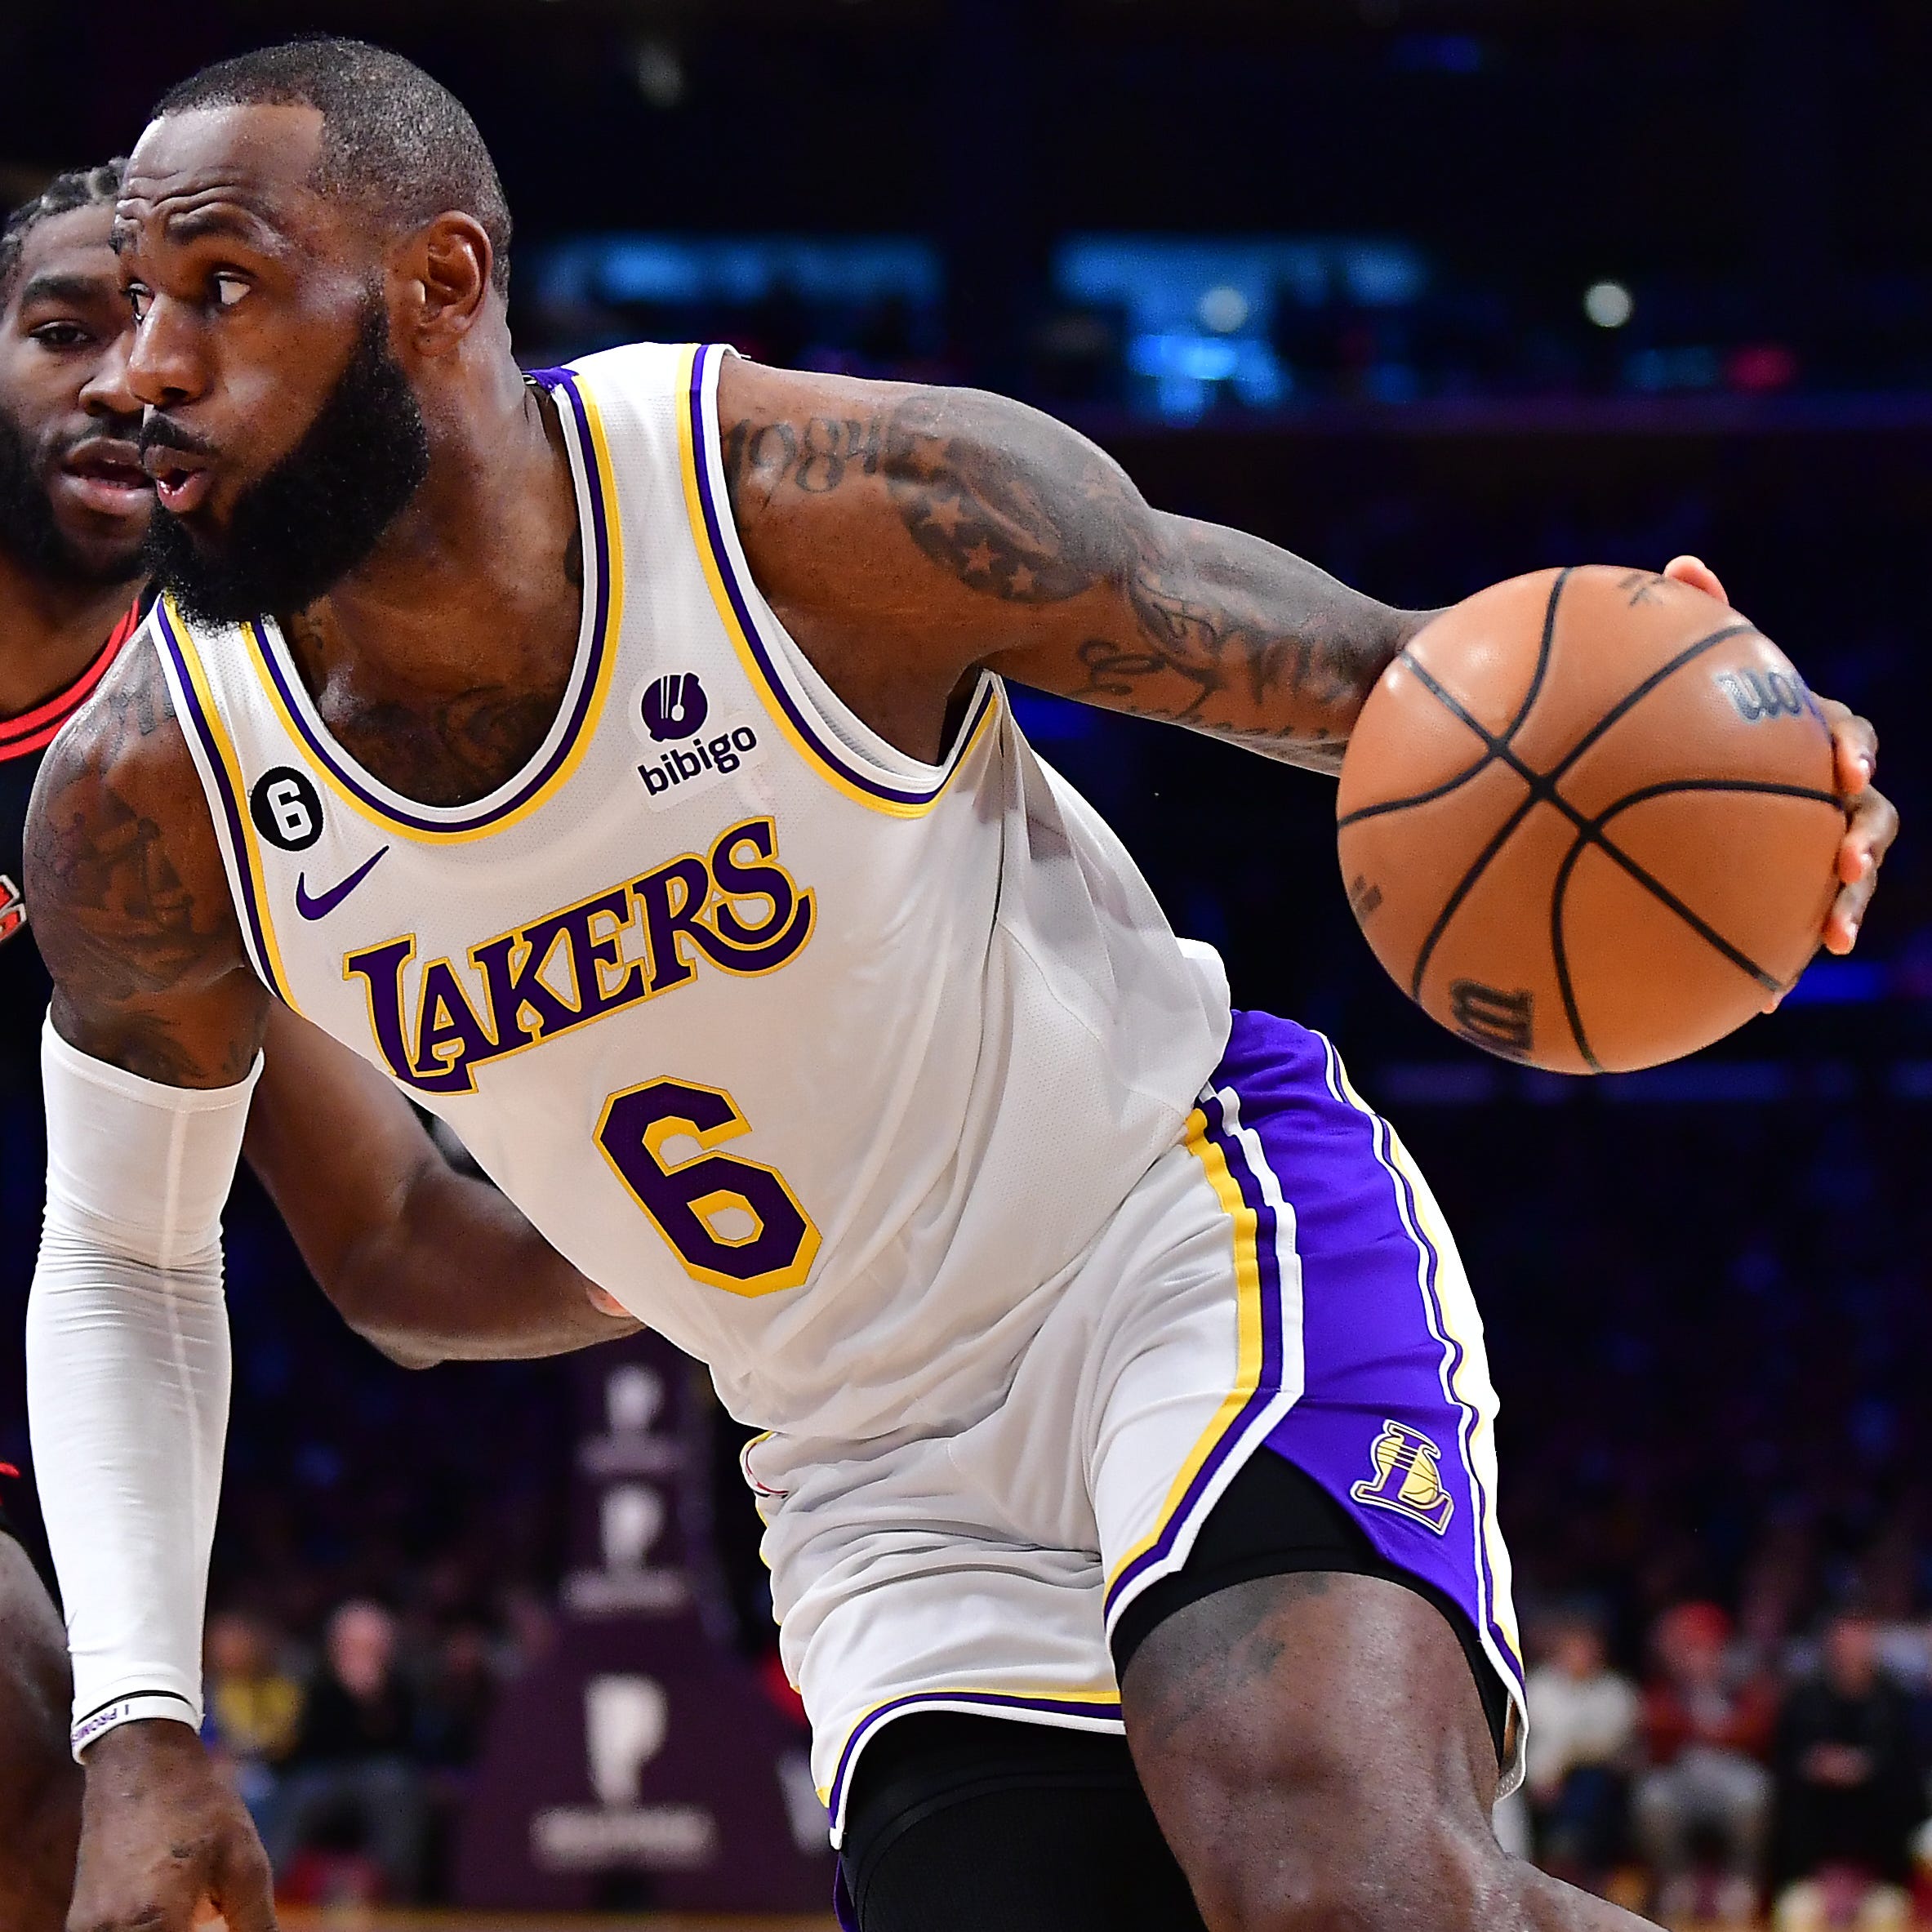 LeBron James scored a team-high 19 points in the Lakers' 118-108 loss to the Bulls.